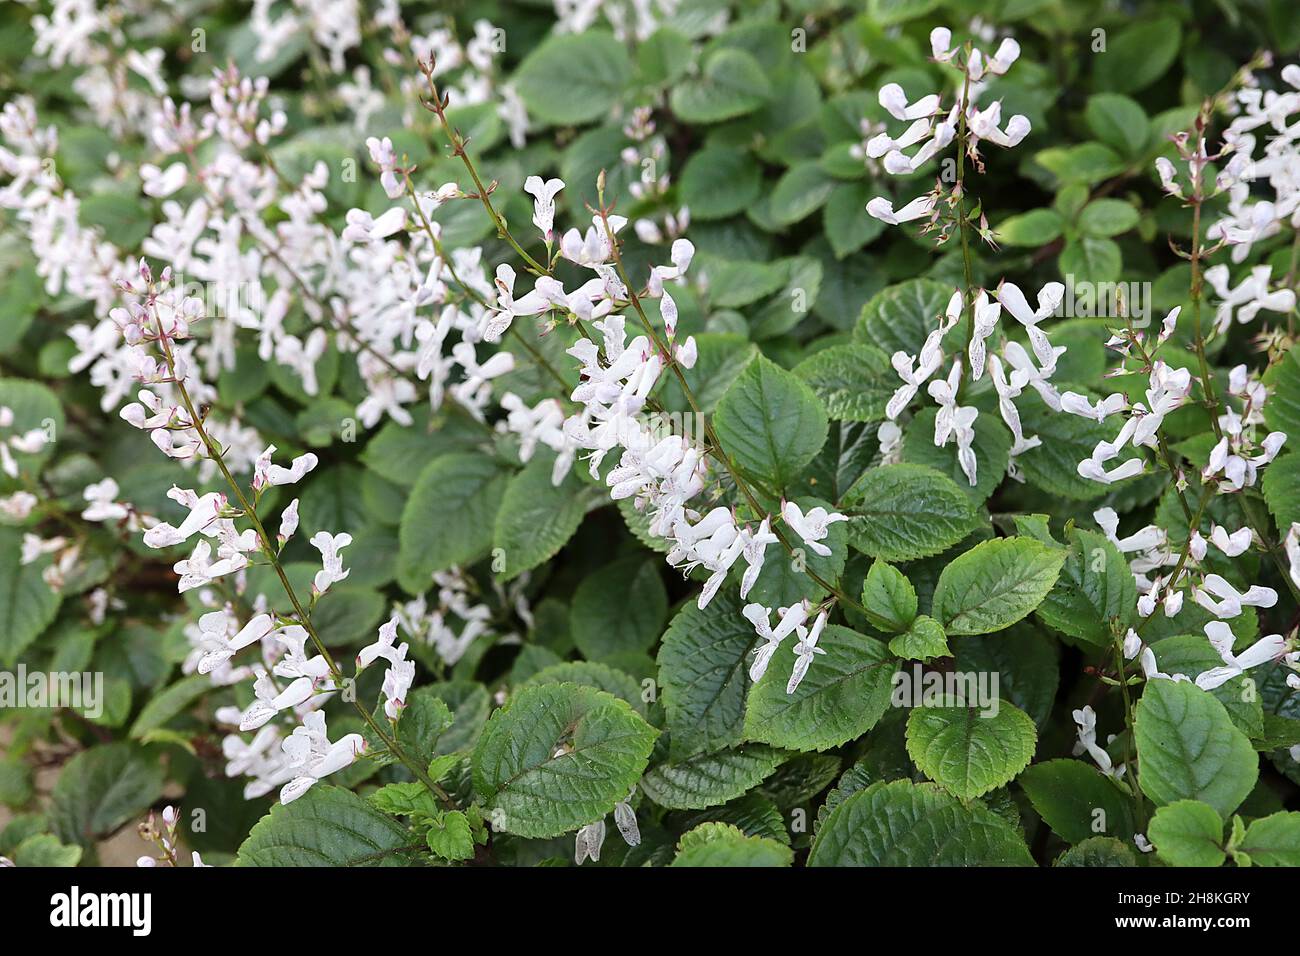 Plectranthus ciliates speckled spur flower – two-lipped white flowers with purple speckles, ovate veined glossy dark green leaves,  November, England, Stock Photo